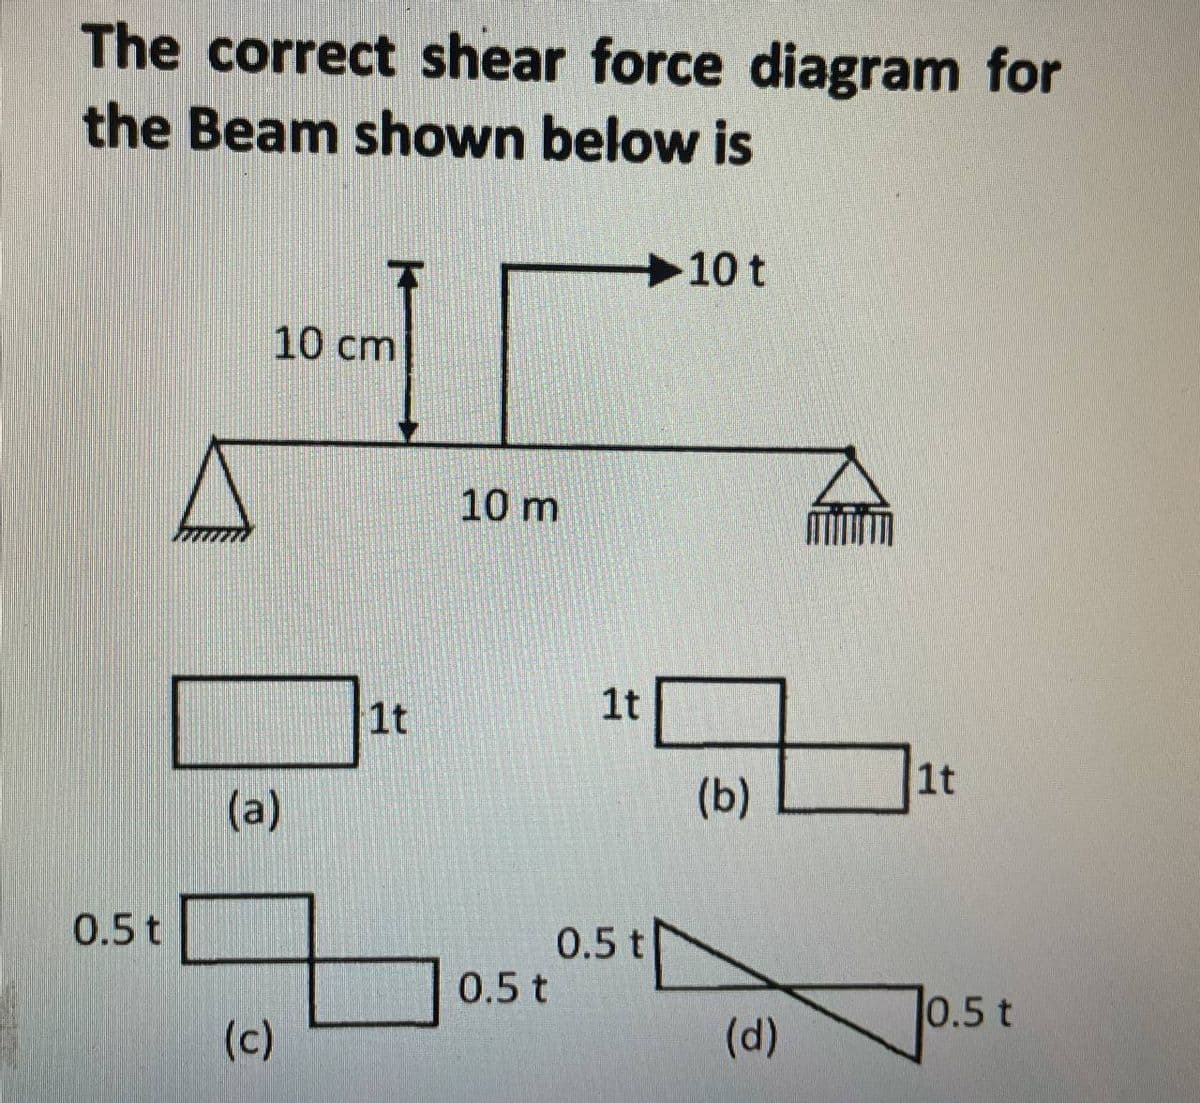 The correct shear force diagram for
the Beam shown below is
0.5 t
10 cm
(a)
(c)
1t
10 m
0.5 t
-10 t
1t
0.5 t
(b)
(d)
1t
0.5 t